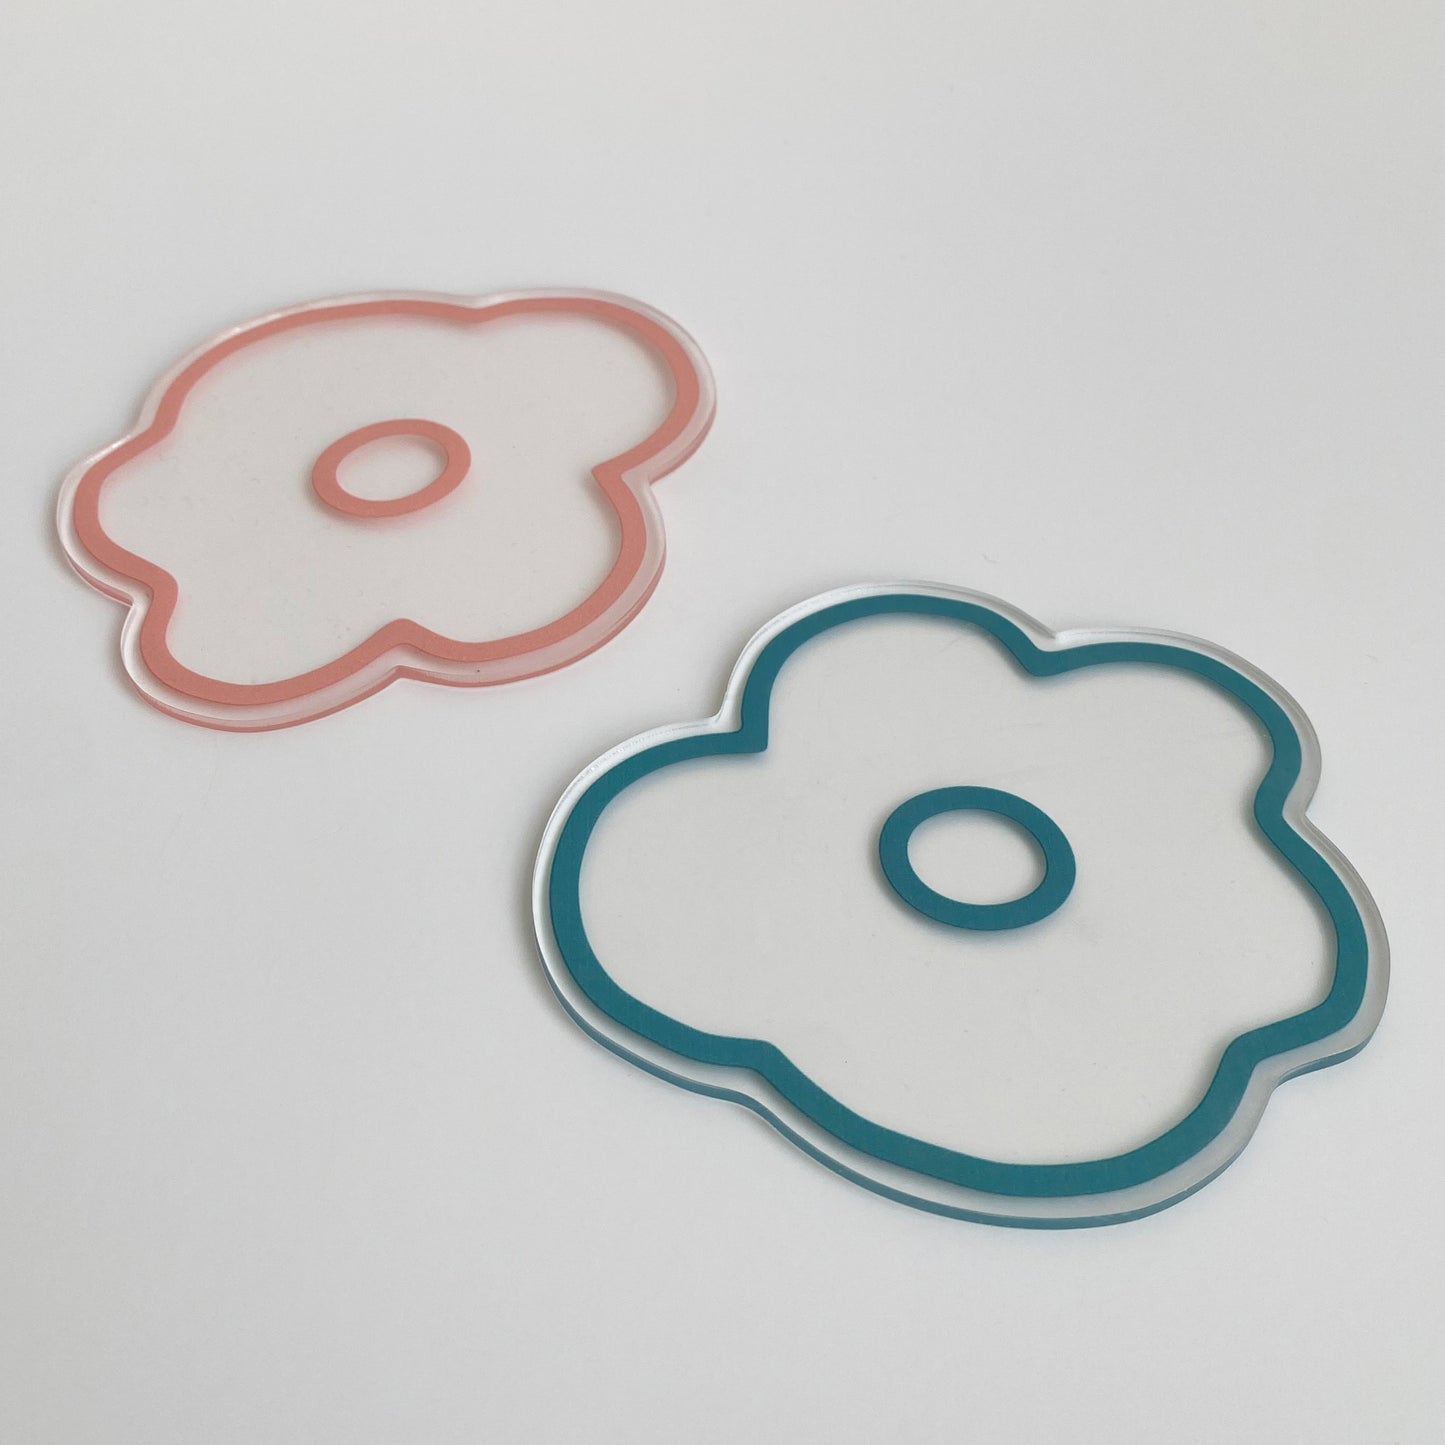 19 abstract flower coaster